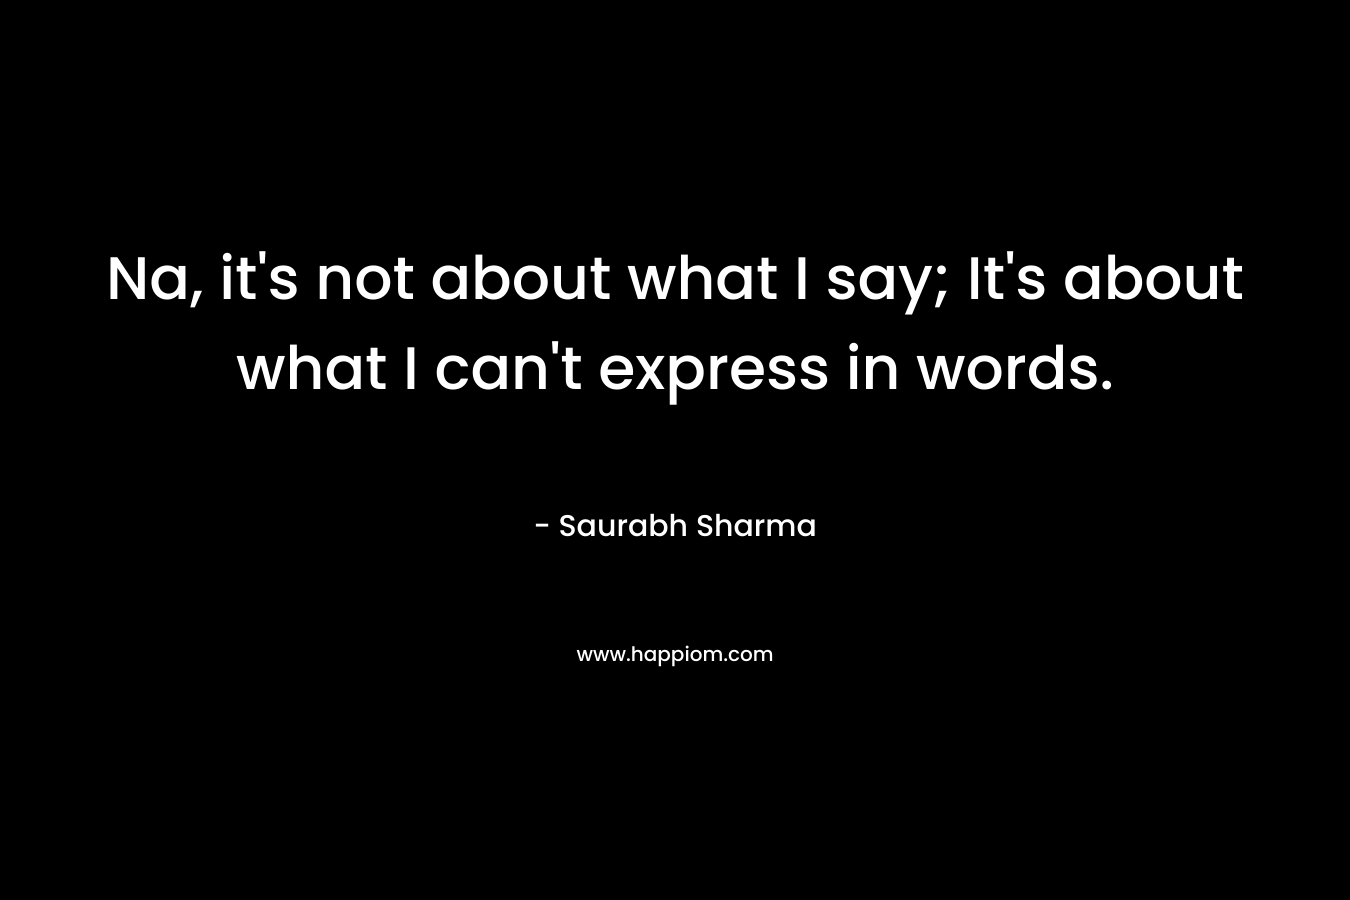 Na, it's not about what I say; It's about what I can't express in words.